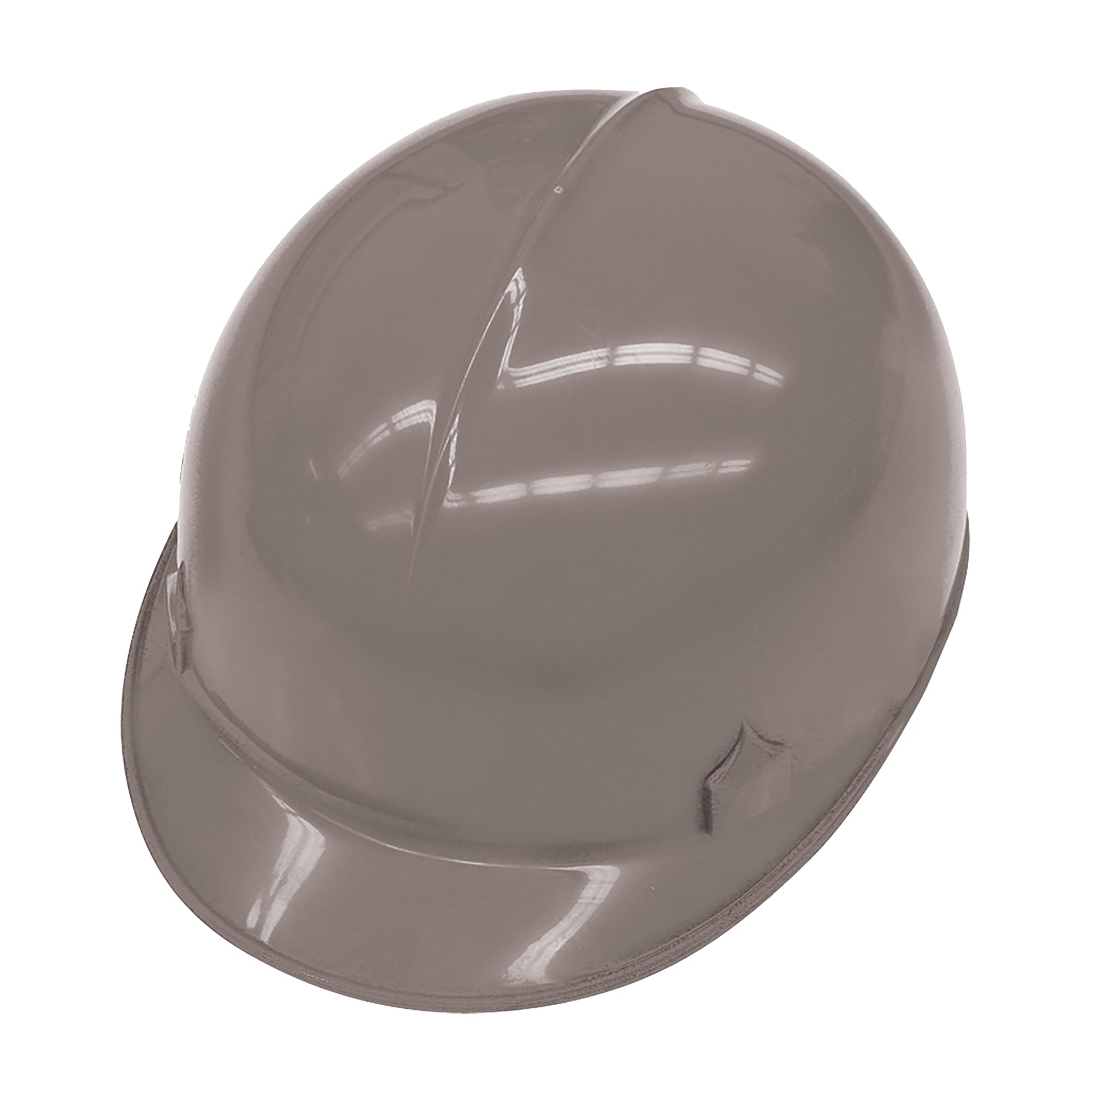 Jackson Safety* 14816 C10 Lightweight Bump Cap, Gray, HDPE, 4-Point Pinlock Suspension redirect to product page